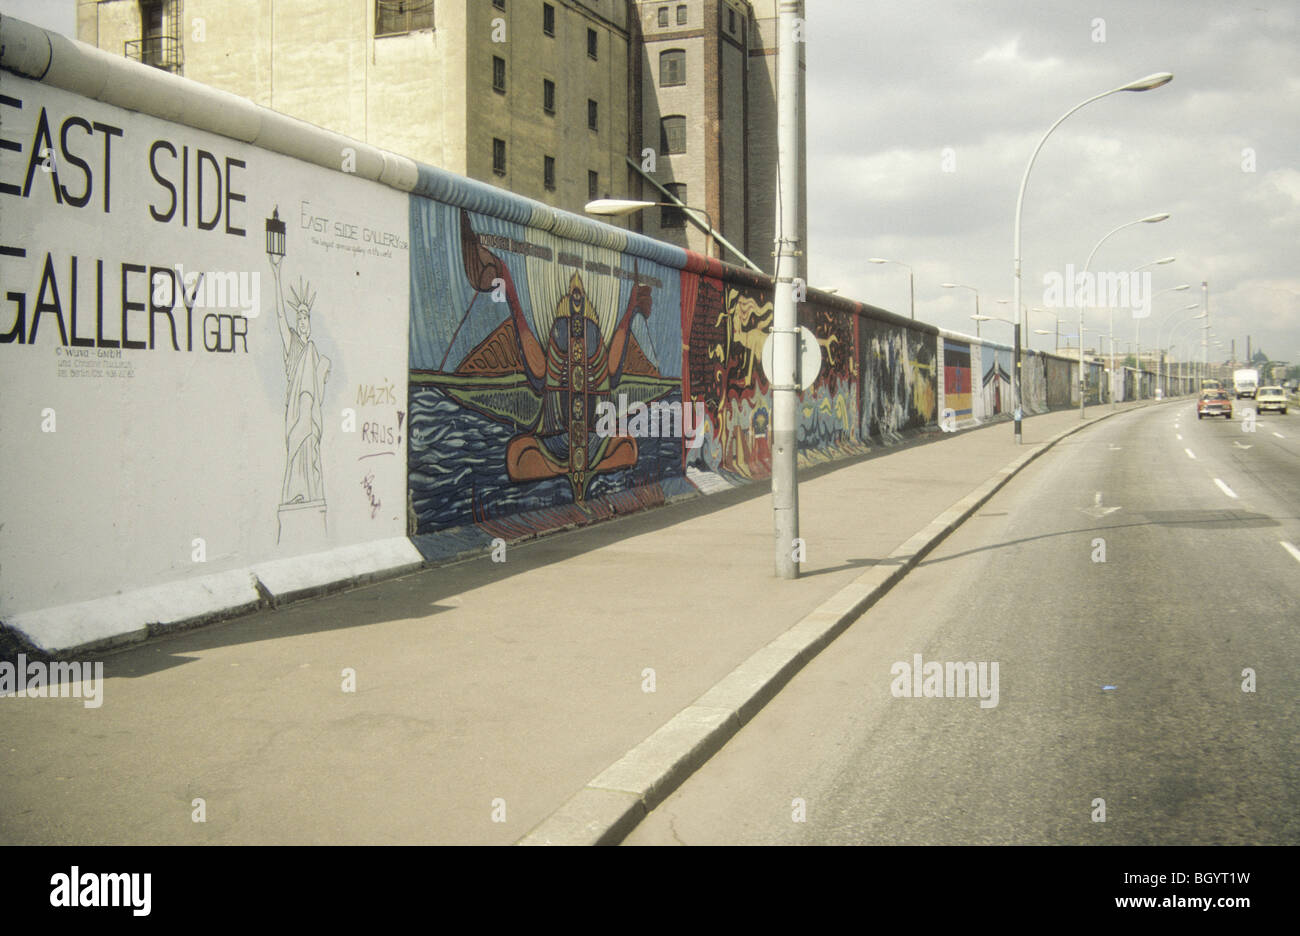 East Gallery on the West German side of the Berlin Wall a few months before the collapse of the Soviet Union. Stock Photo